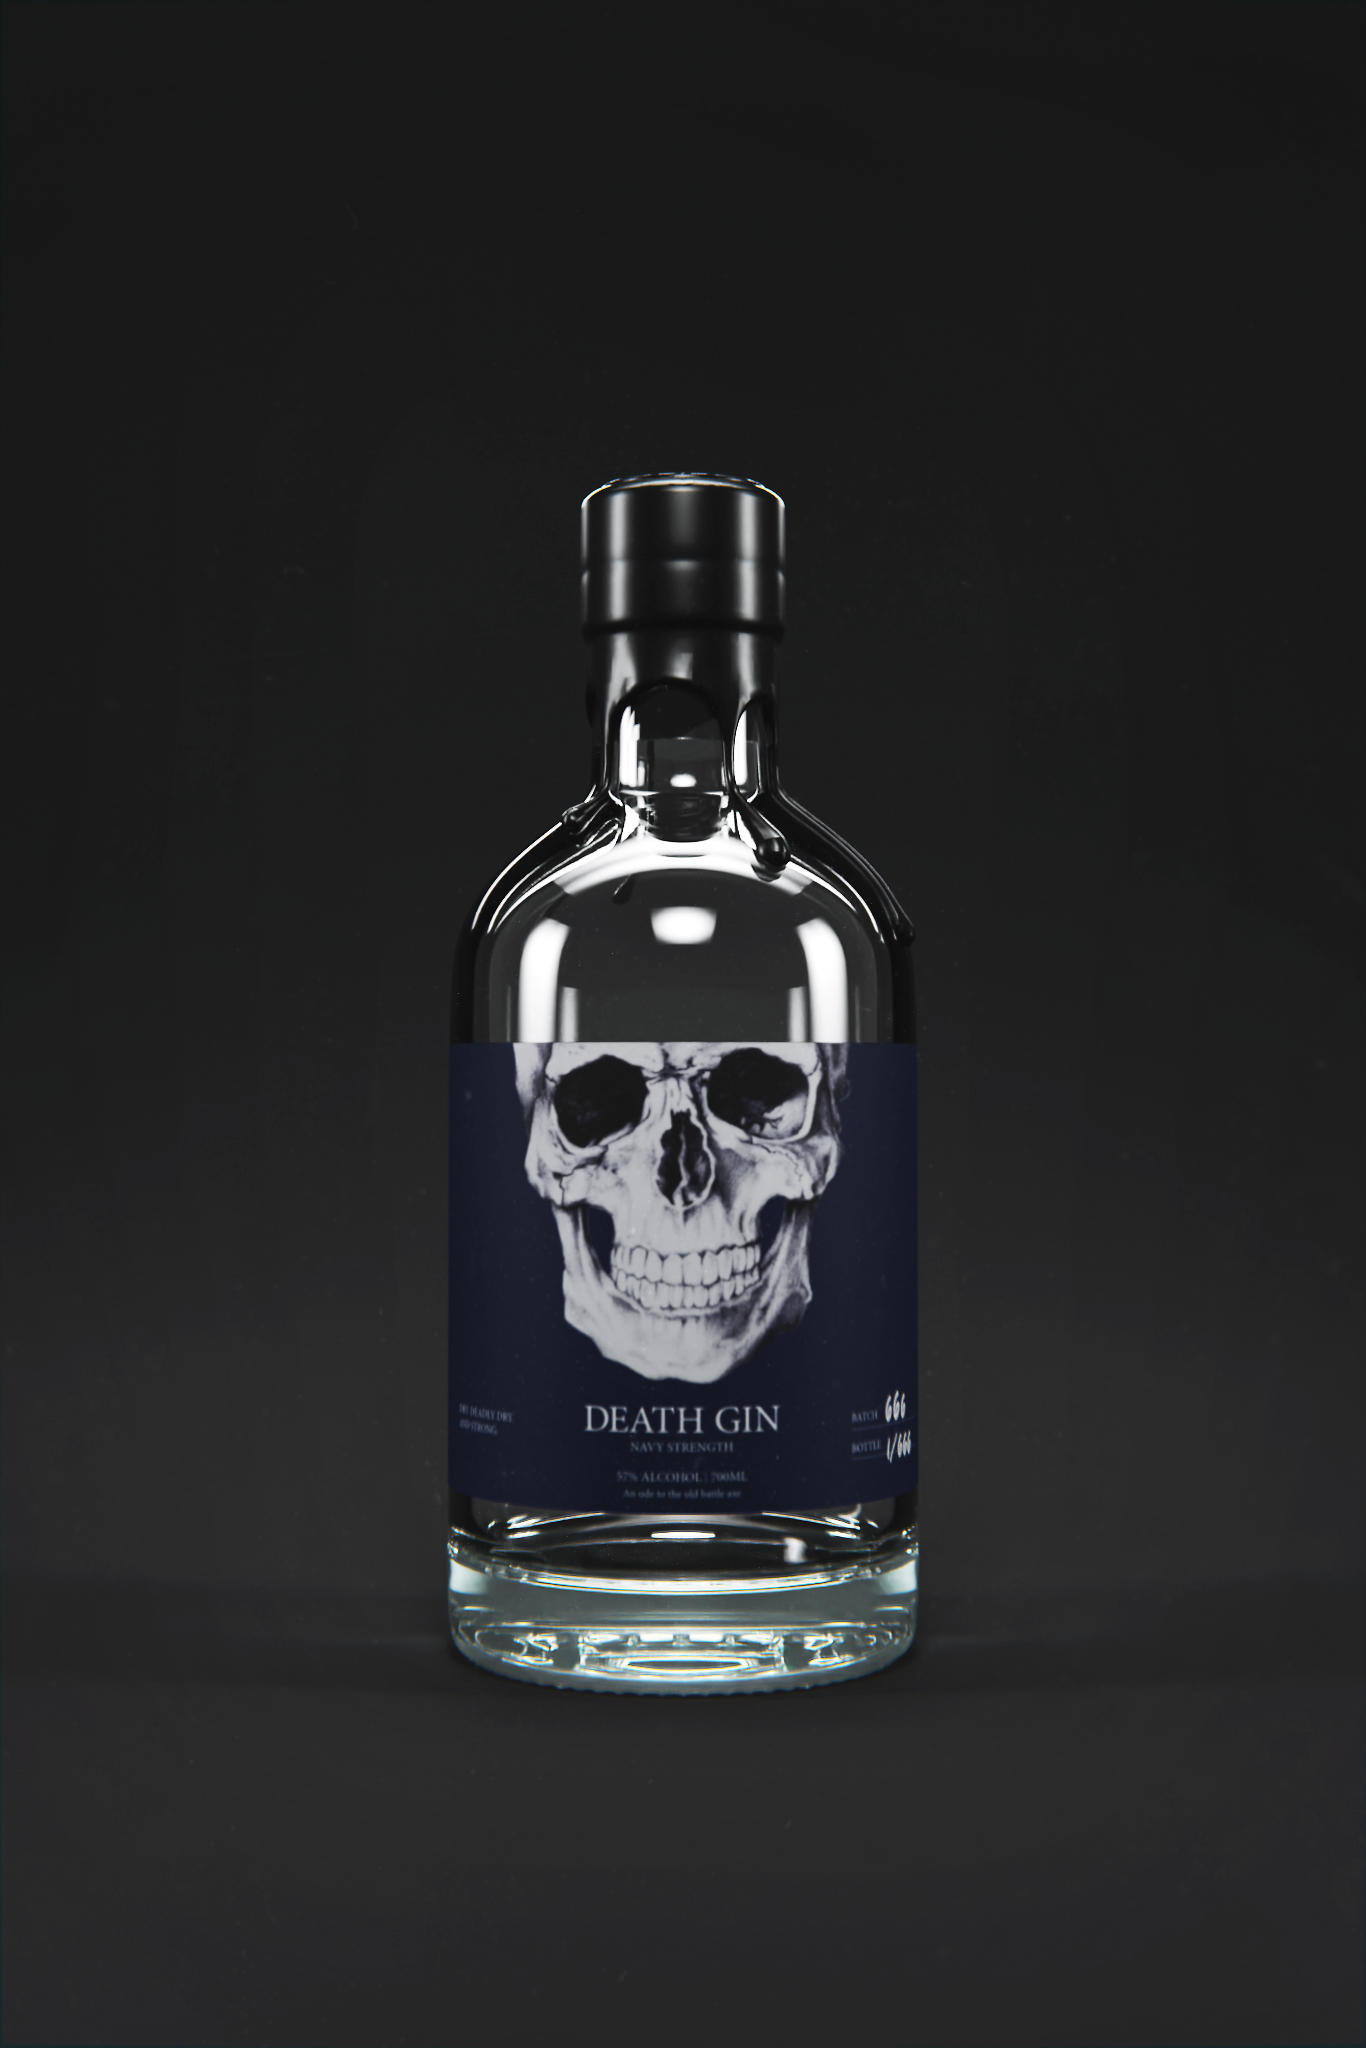 Navy Comp - Death gin 3D product visualization - Sonny Nguyen